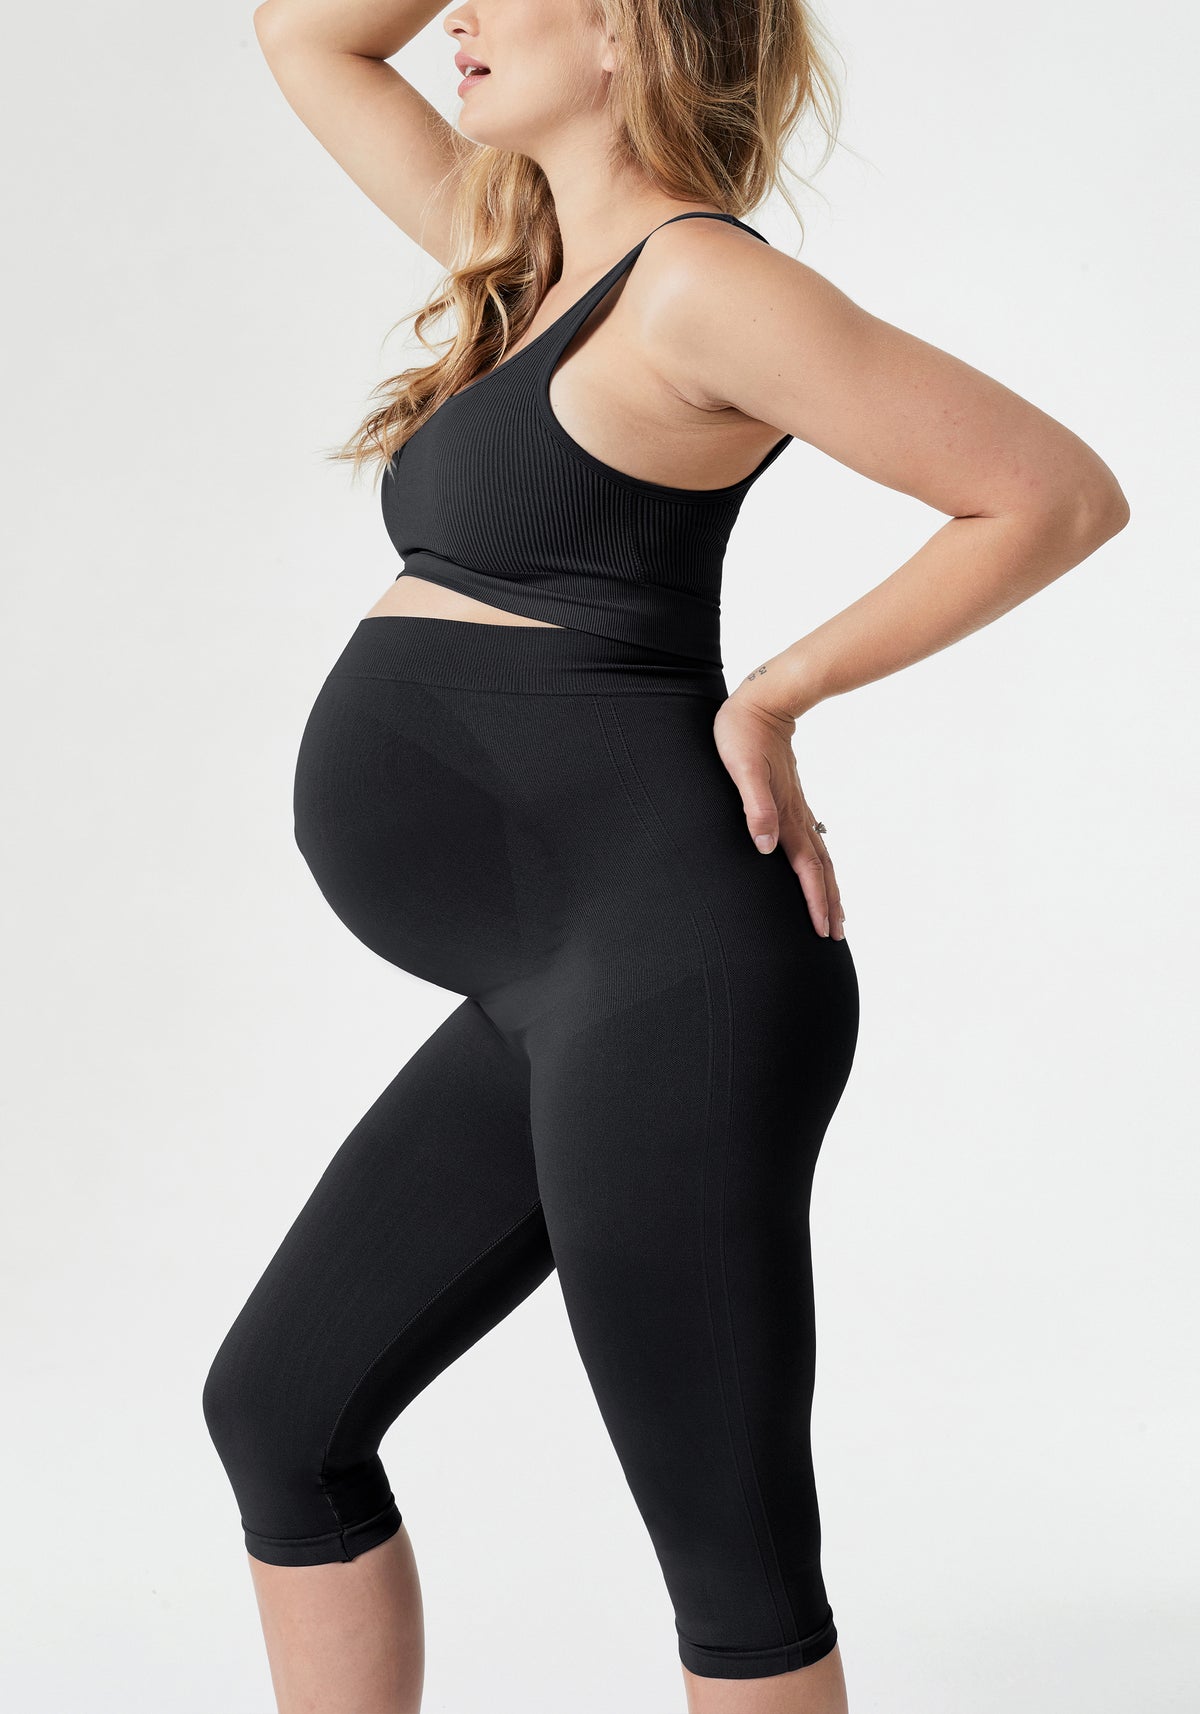 Dani Green on X: Talk about maternity leggings #FAIL @hmsouthafrica, you  can see my undies, leggings are completely see-through!! What the..?!!   / X